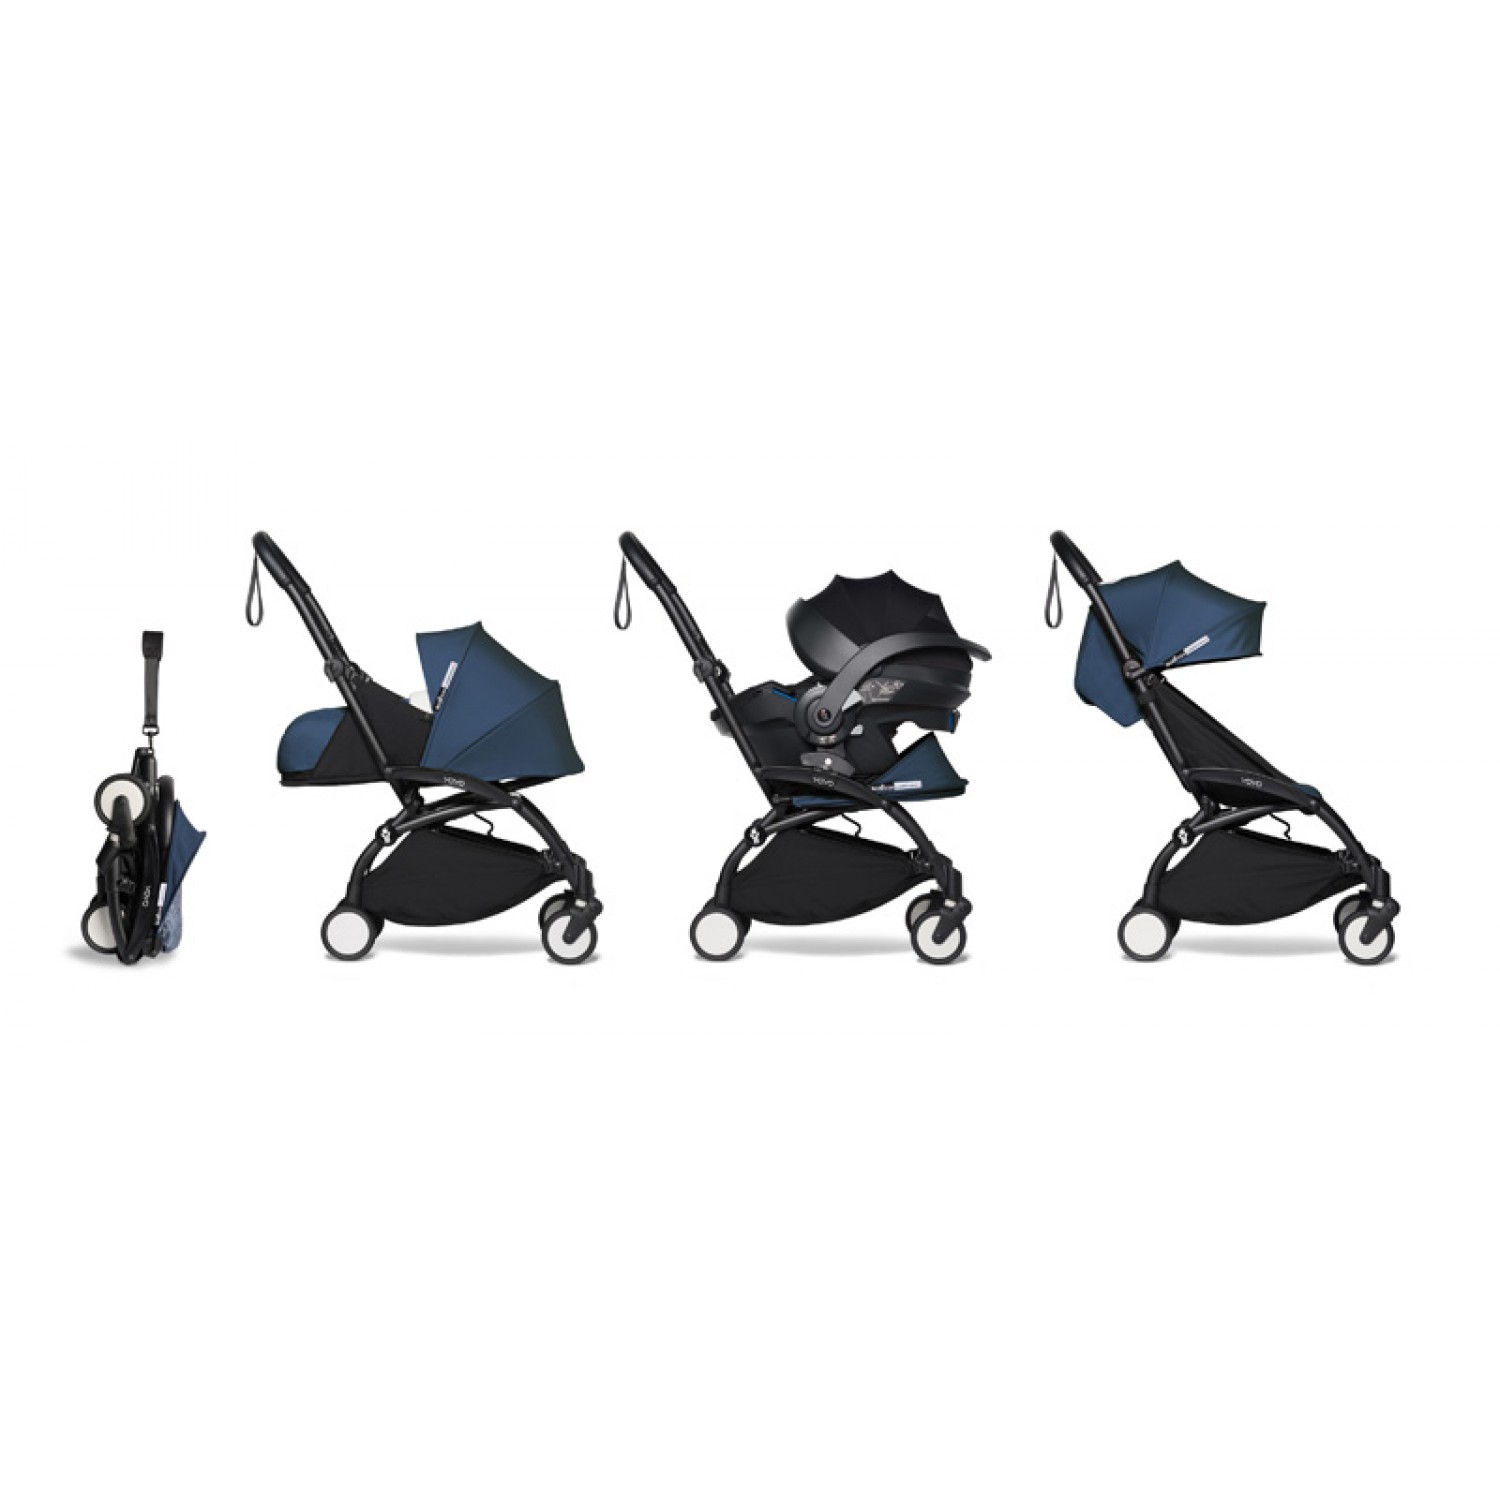 All-in-one BABYZEN stroller YOYO2 0+, car seat and 6+ |  Black Chassis Air France